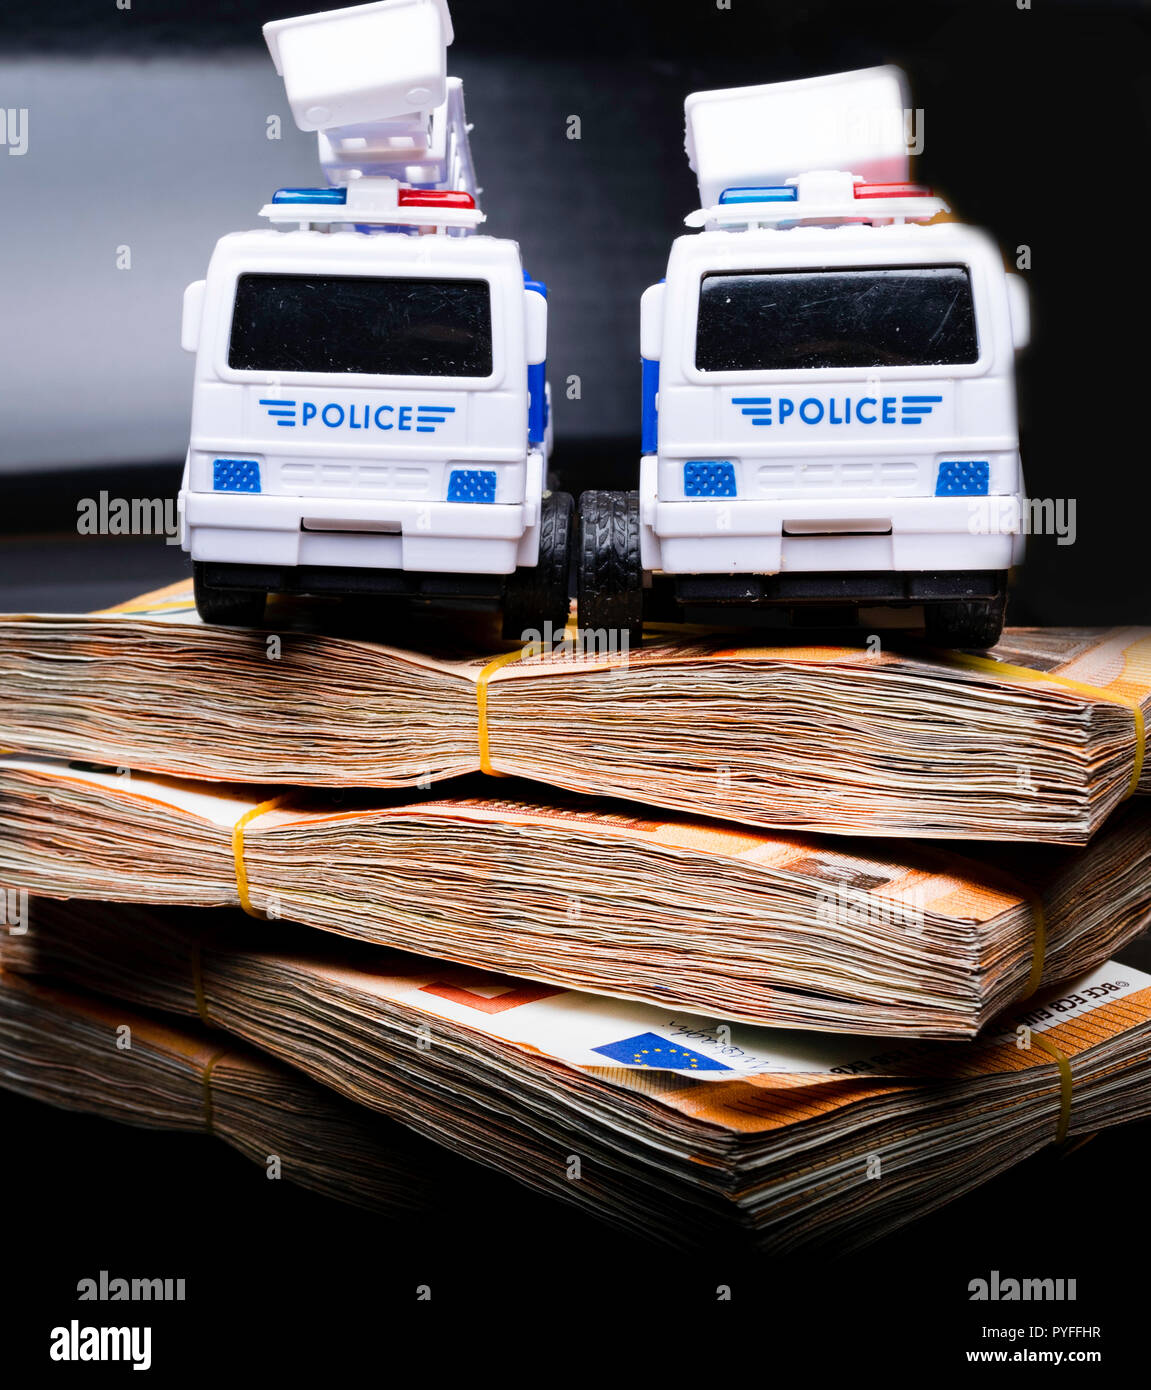 Police corruption in money. Police cars in euros. Crisis in money, bribe and corruption concept Stock Photo